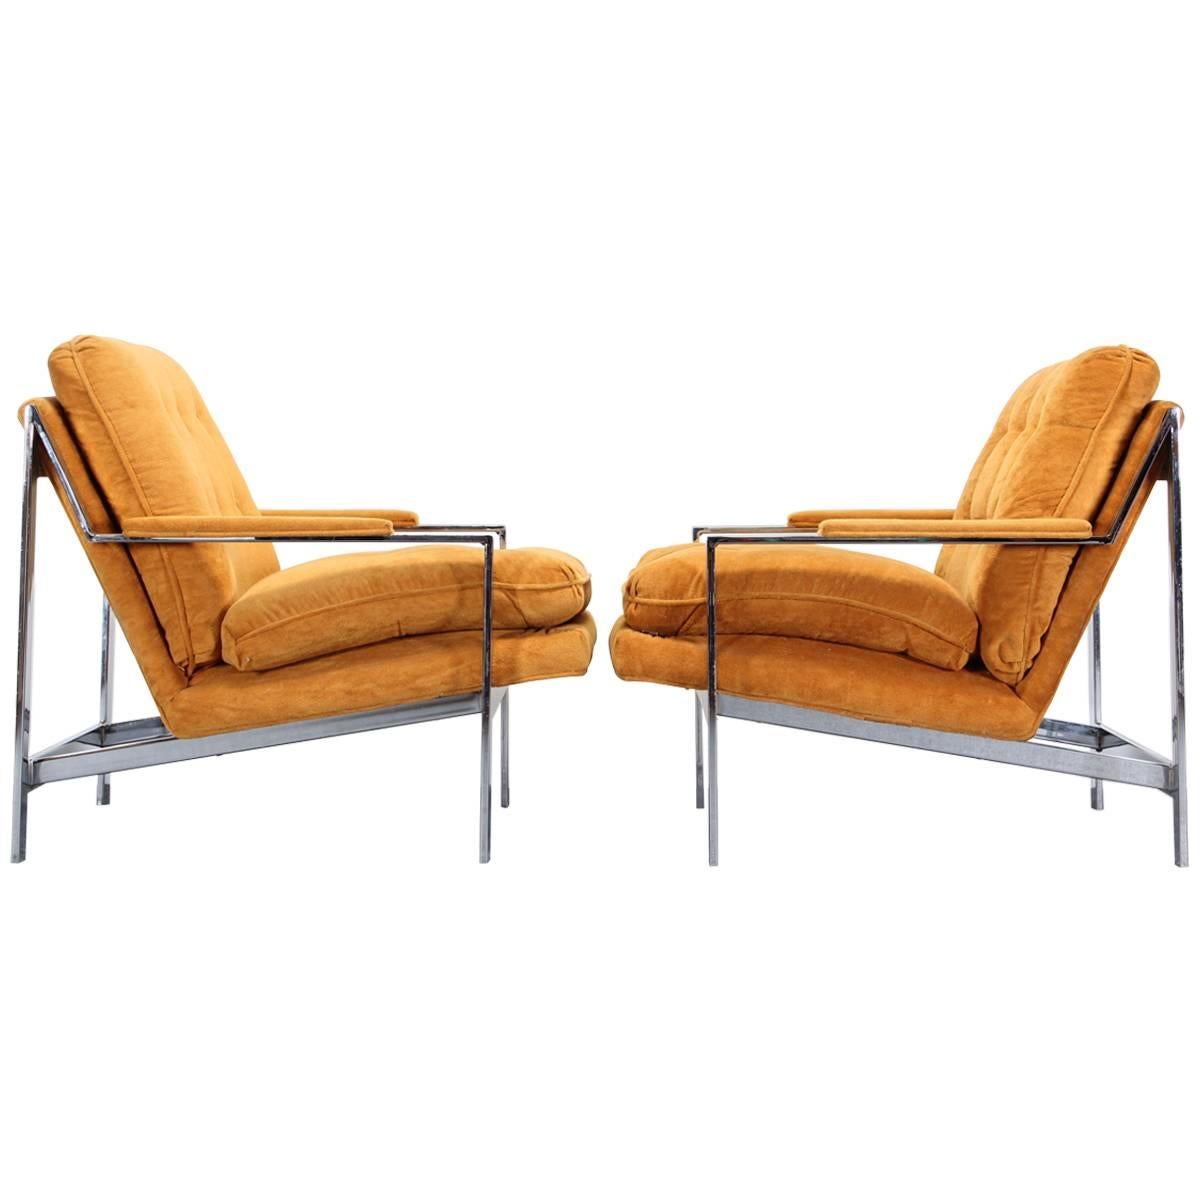 Pair of Chrome Lounge Chairs by Cy Mann, 1970s